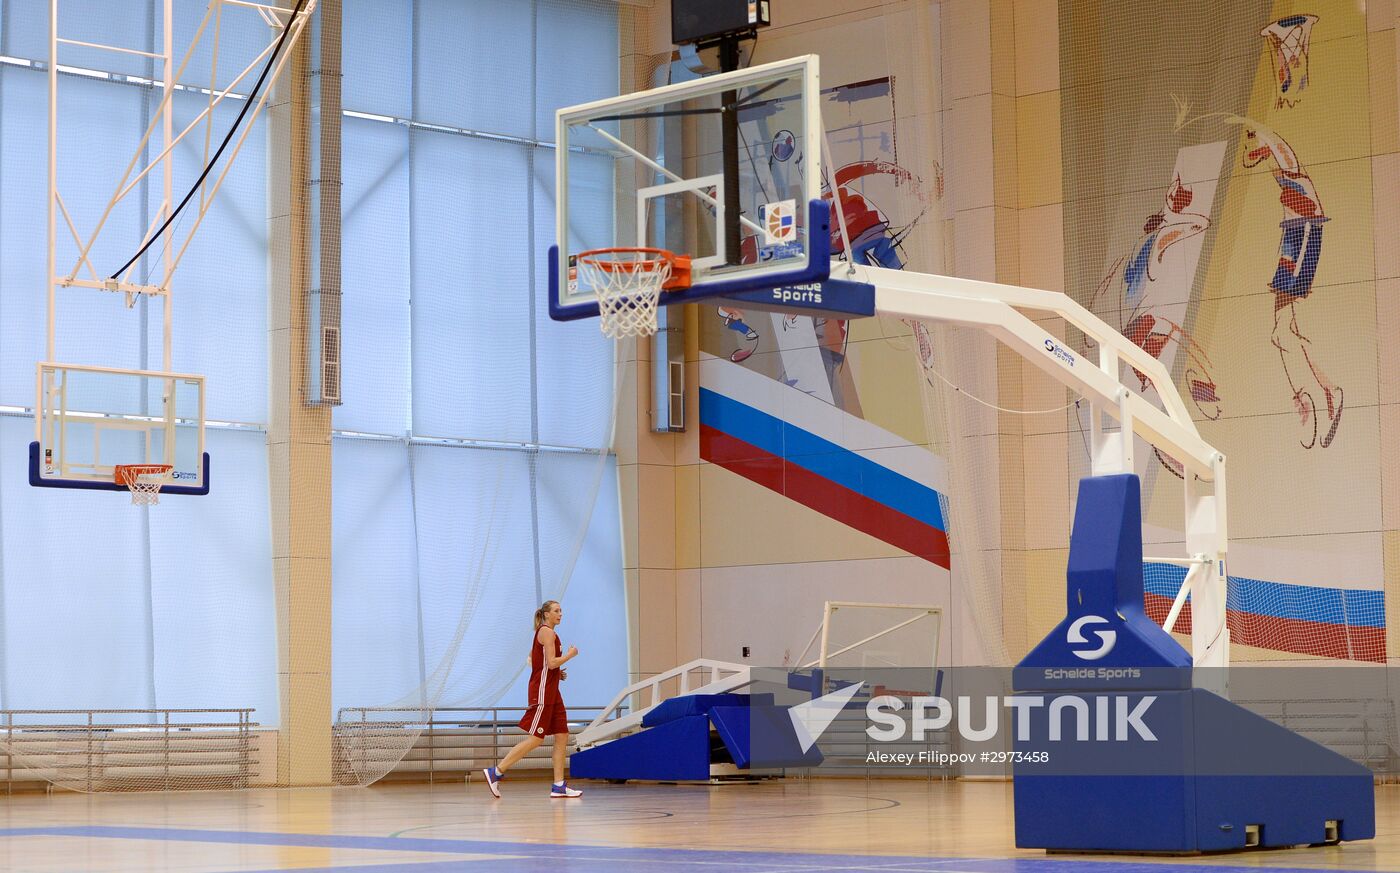 Basketball. Training session of Russian national women's team